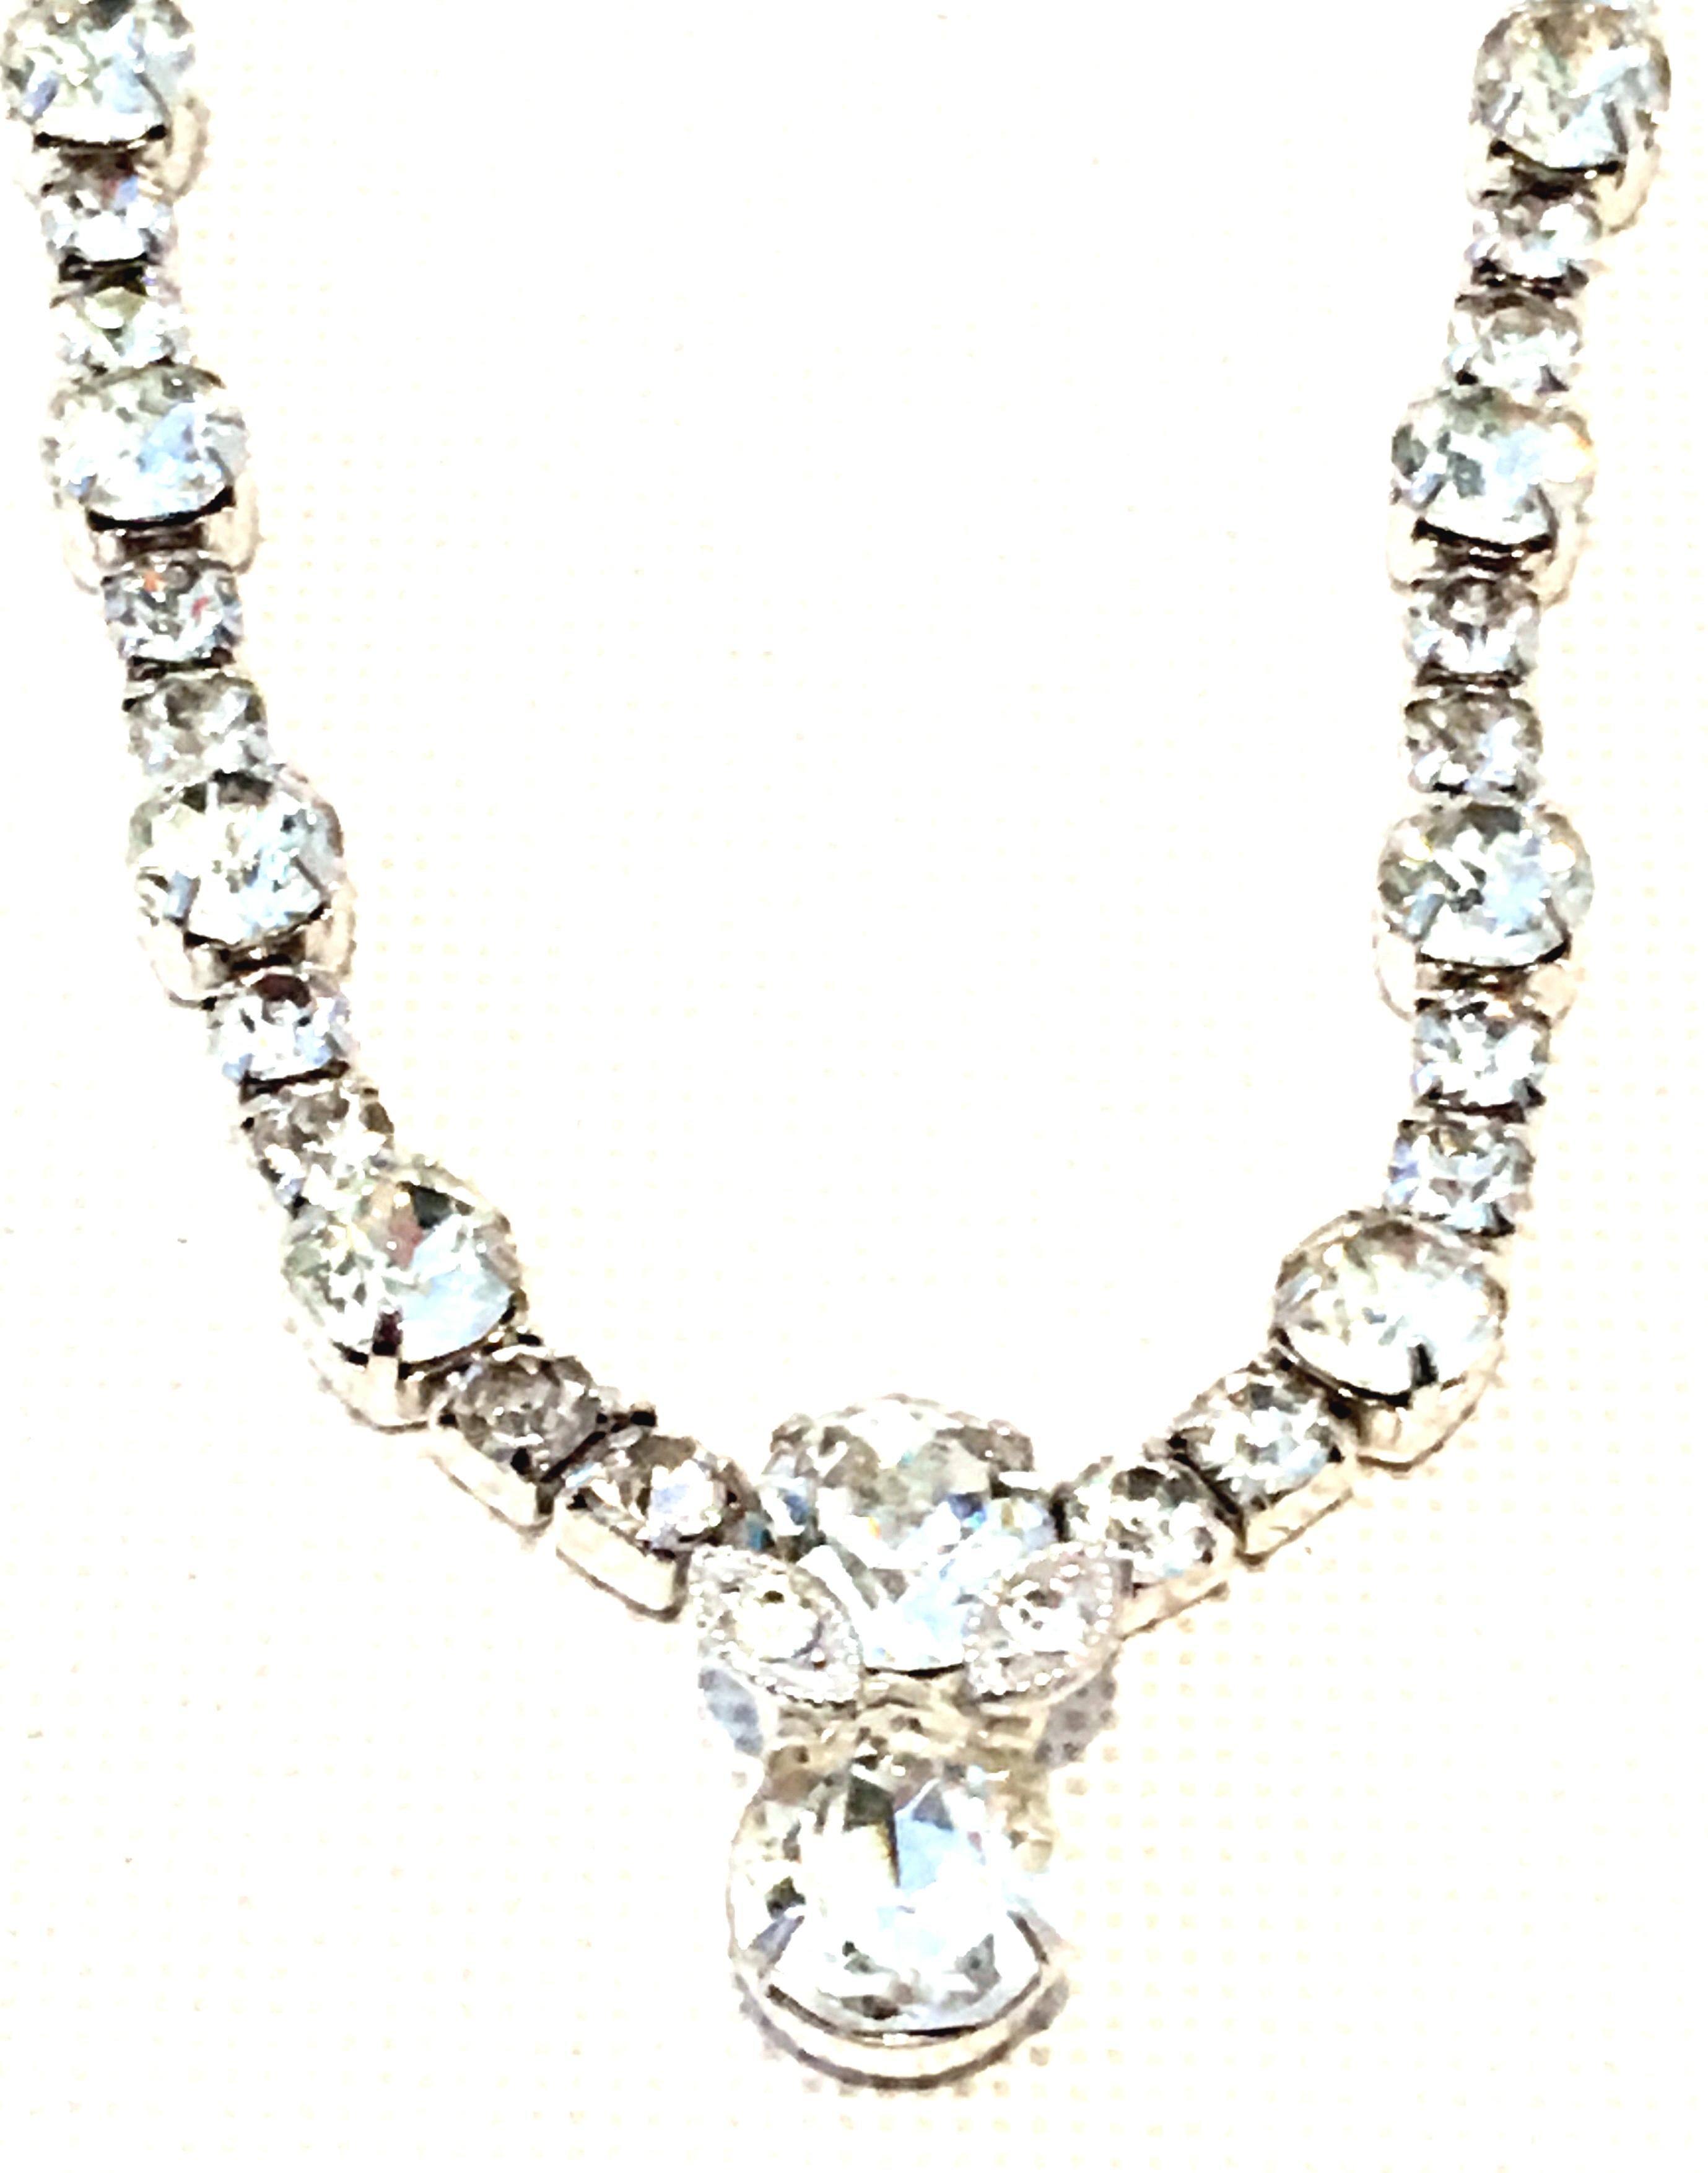 Women's or Men's 20th Century Silver & Swarovski Crystal Choker Style Necklace By, Eisenberg For Sale